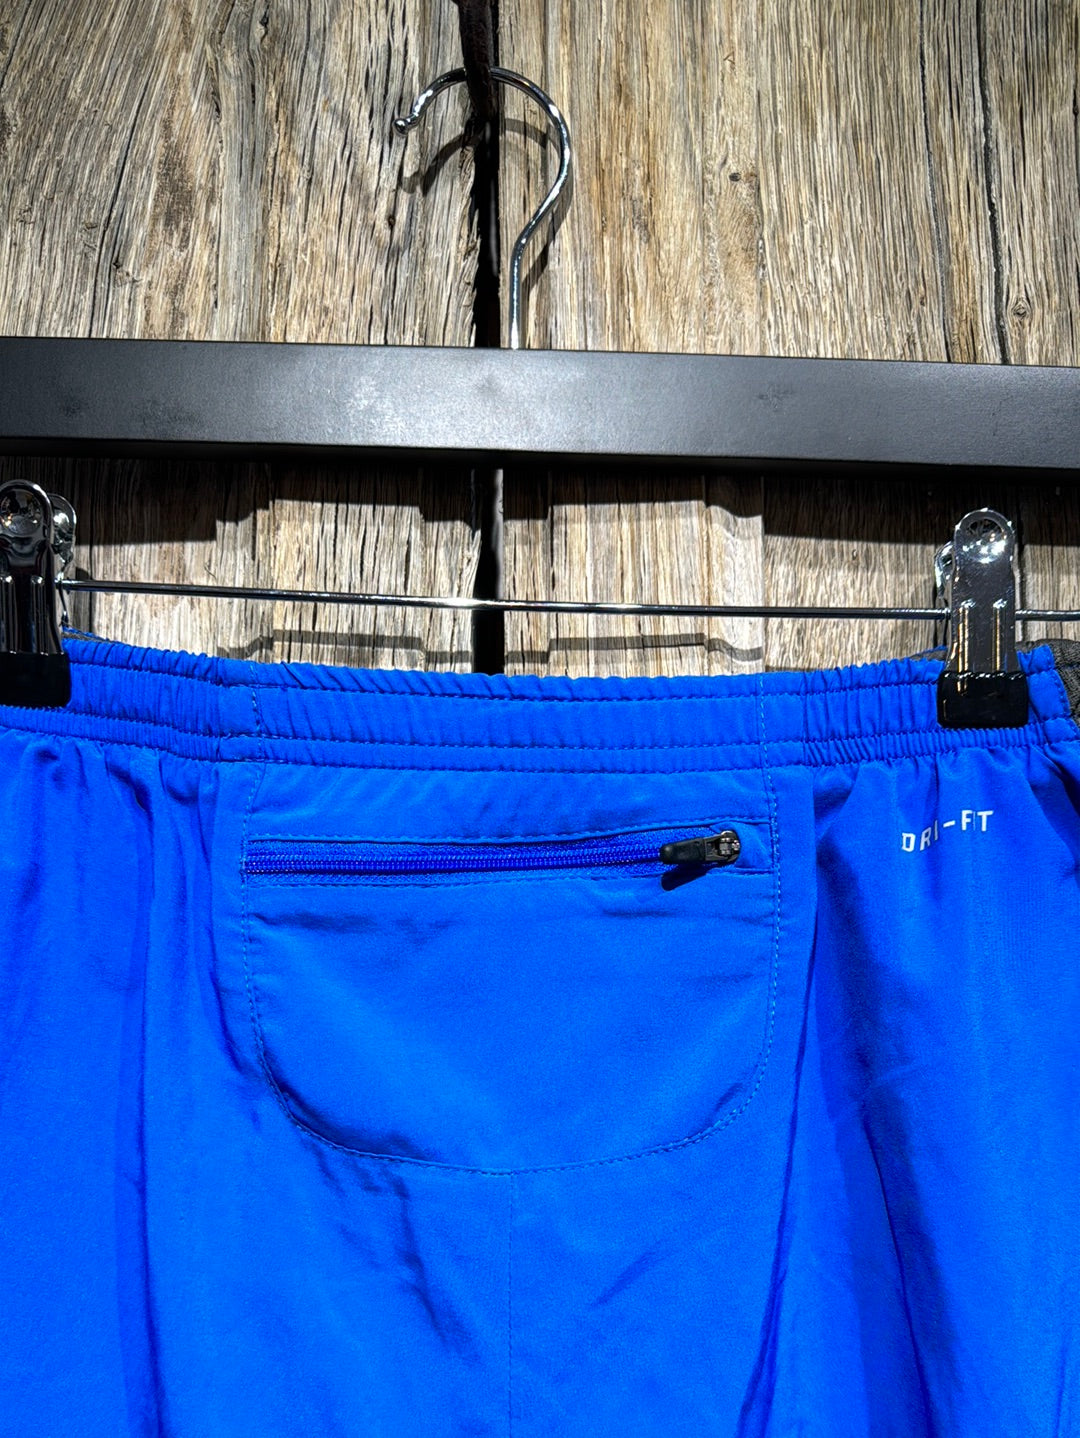 Blue Nike Dry-Fit Running Shorts